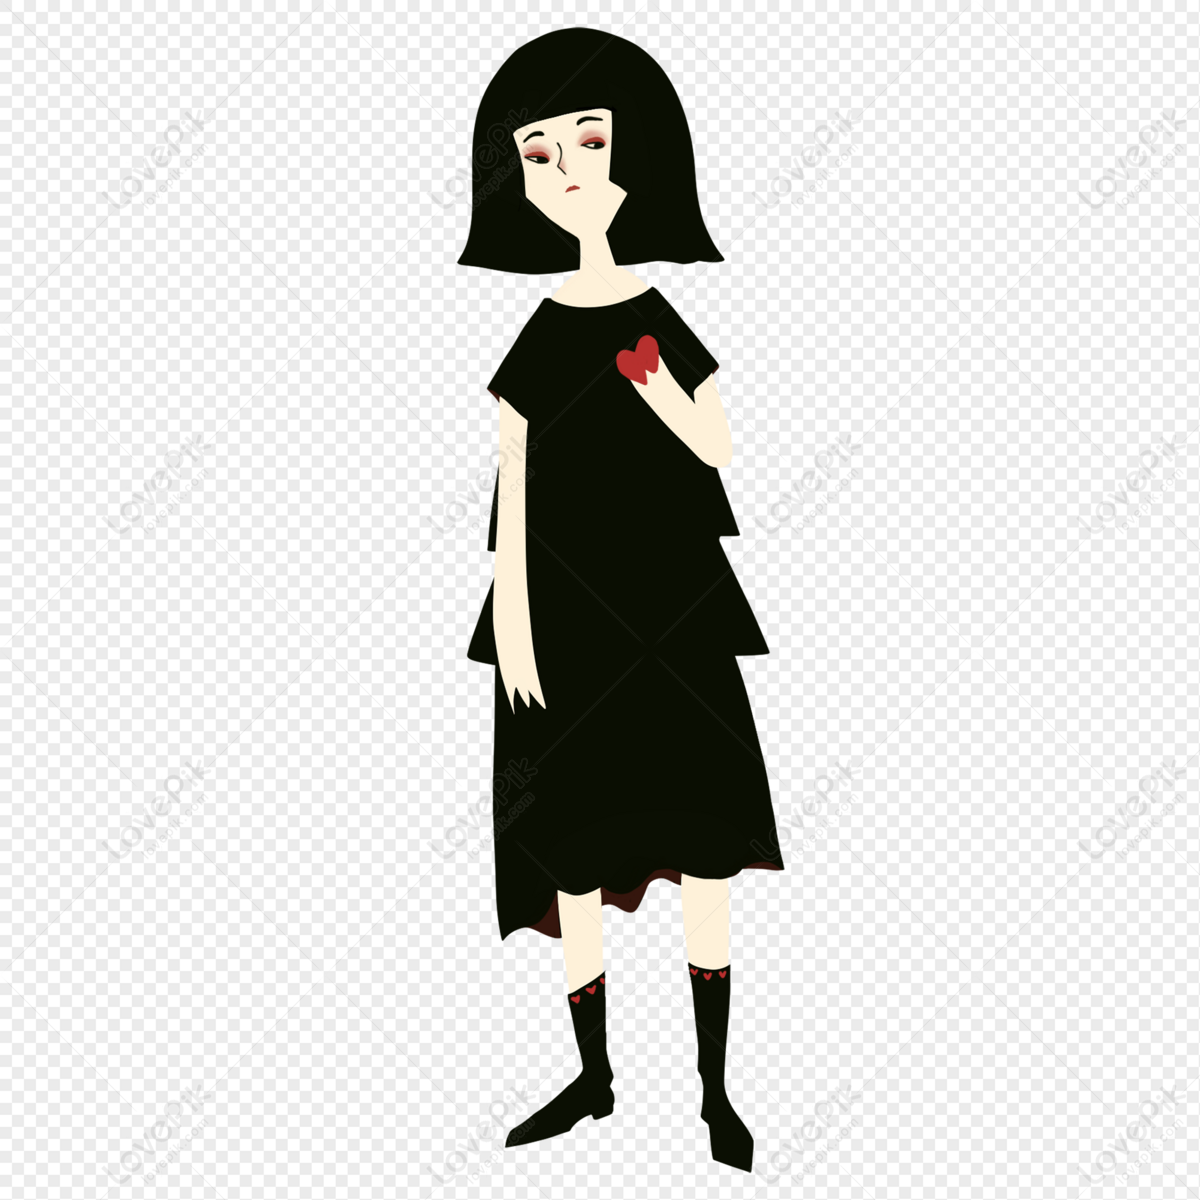 Girl Black Cartoon Character PNG Transparent And Clipart Image For Free  Download - Lovepik | 401410166